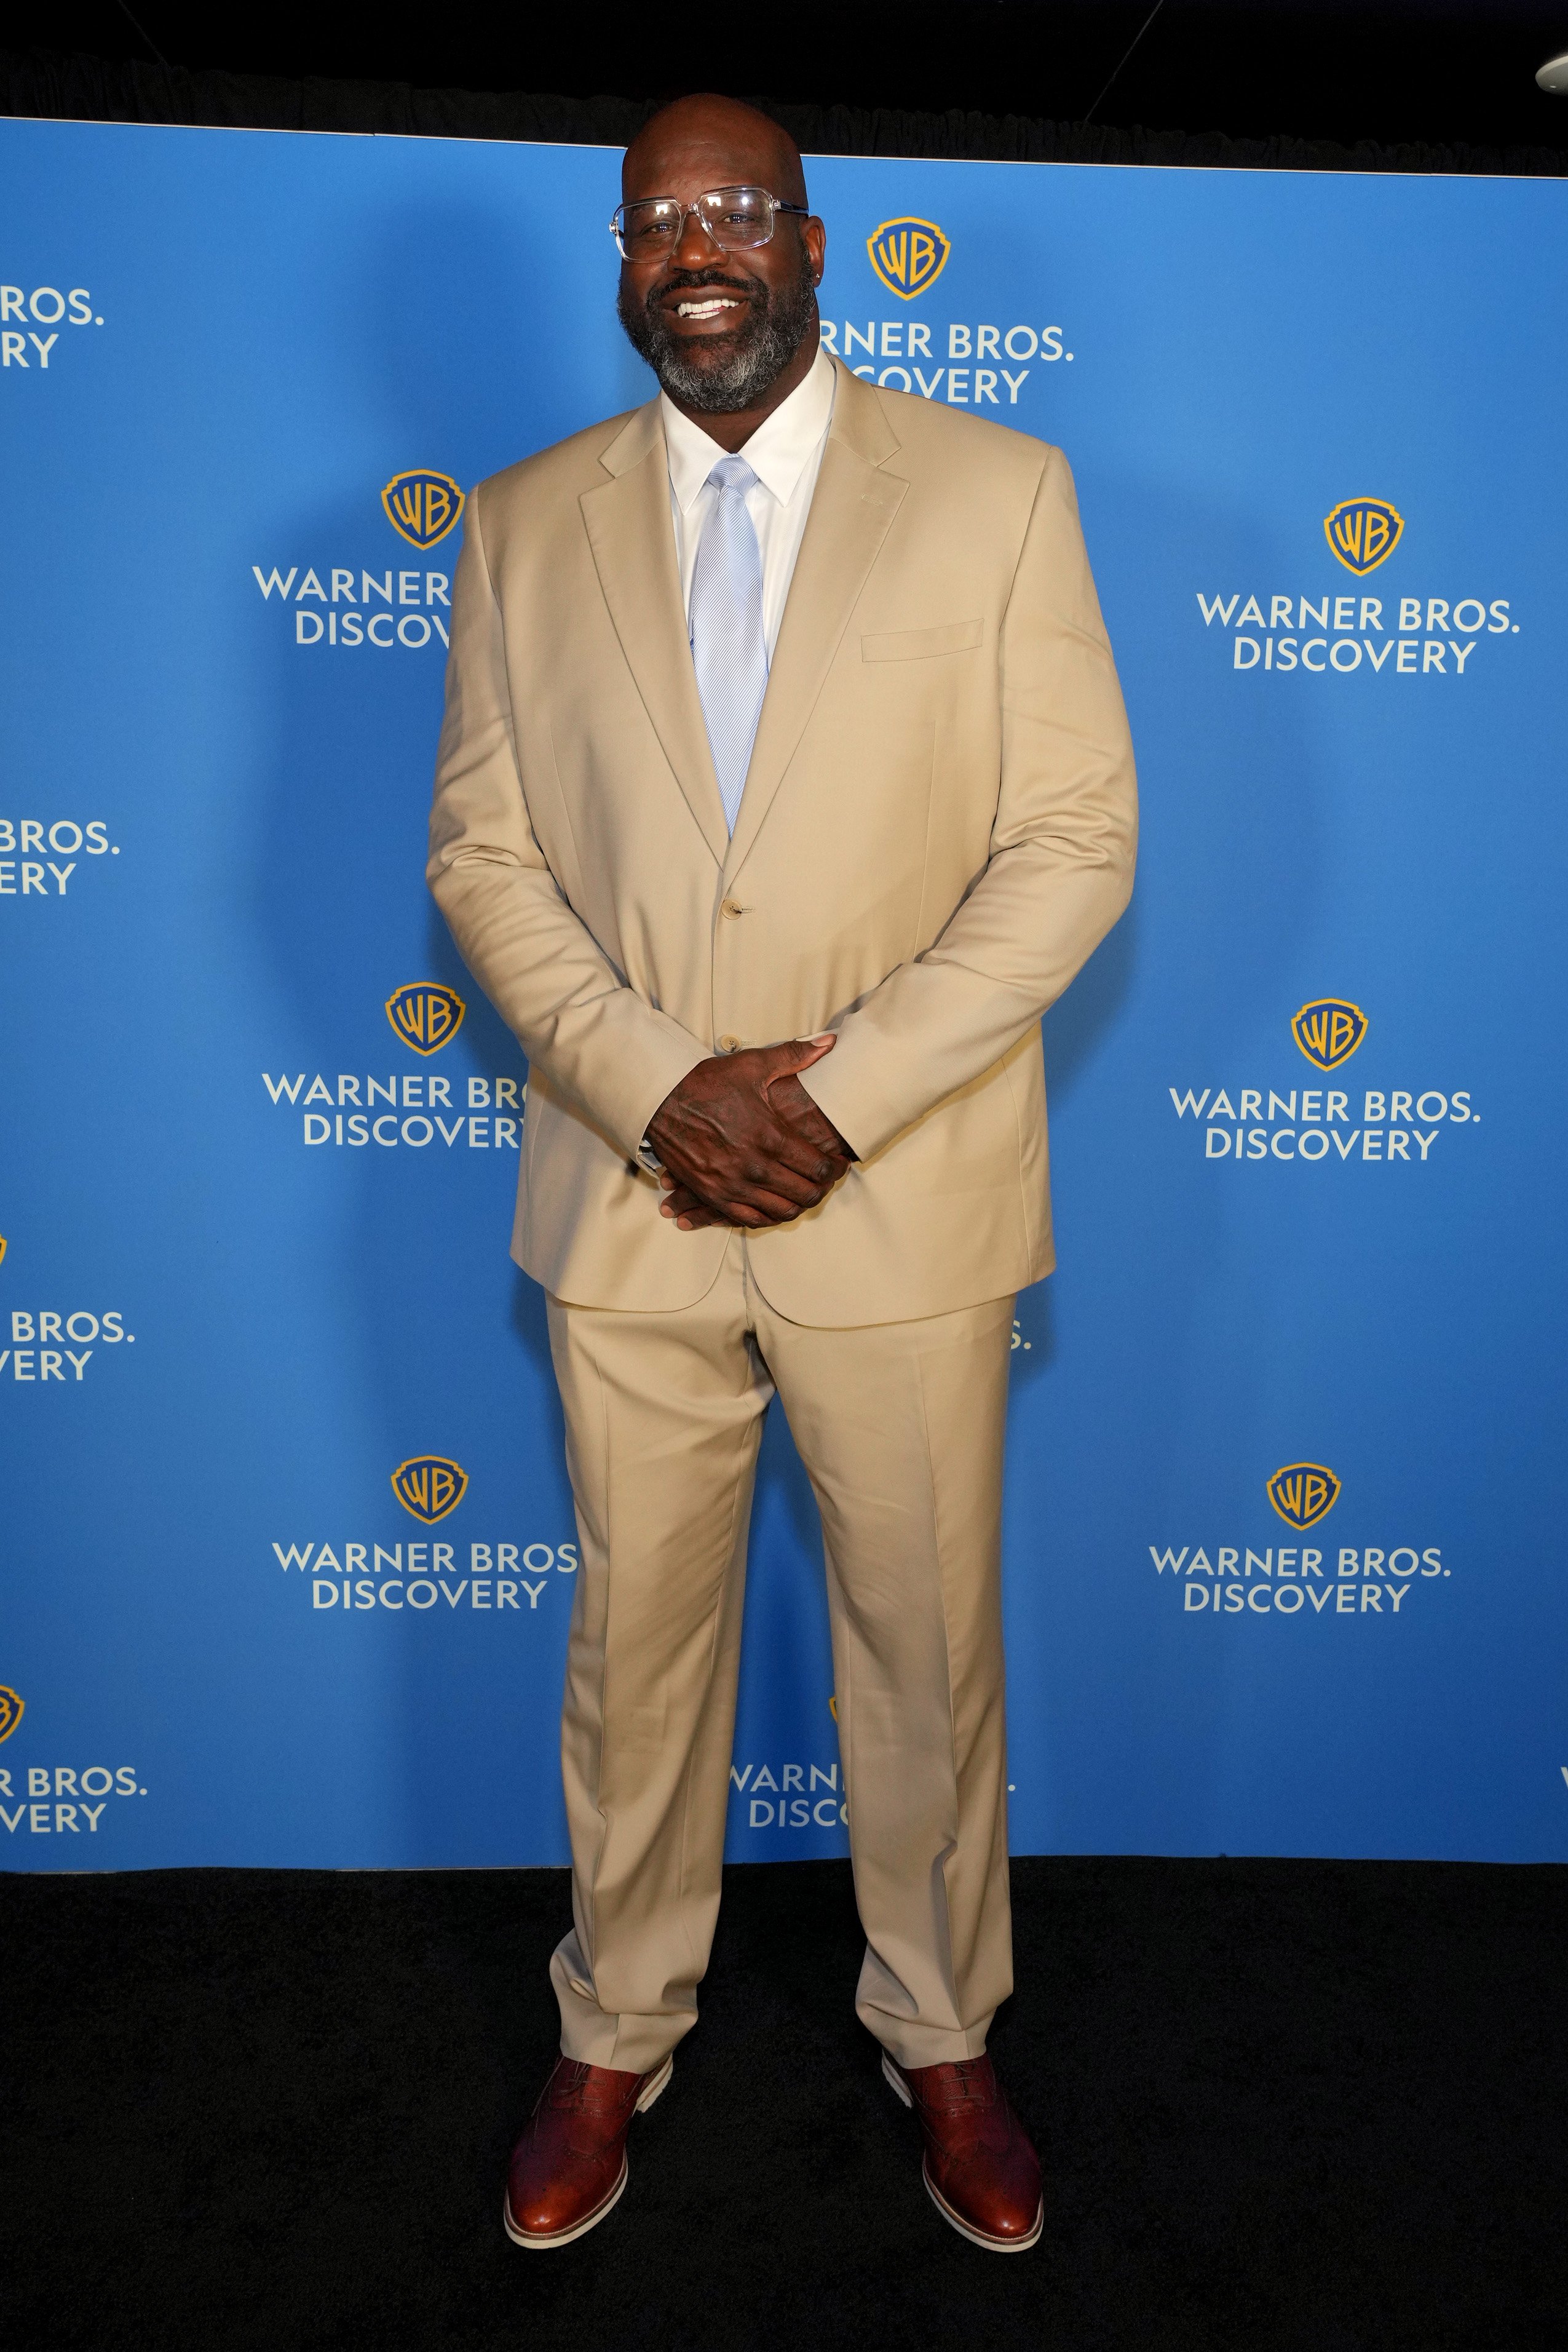 Shaquille O'Neal attends the Warner Bros. Discovery Upfront 2022 arrivals on the red carpet at The Theatre at Madison Square Garden on May 18, 2022, in New York City. | Source: Getty Images